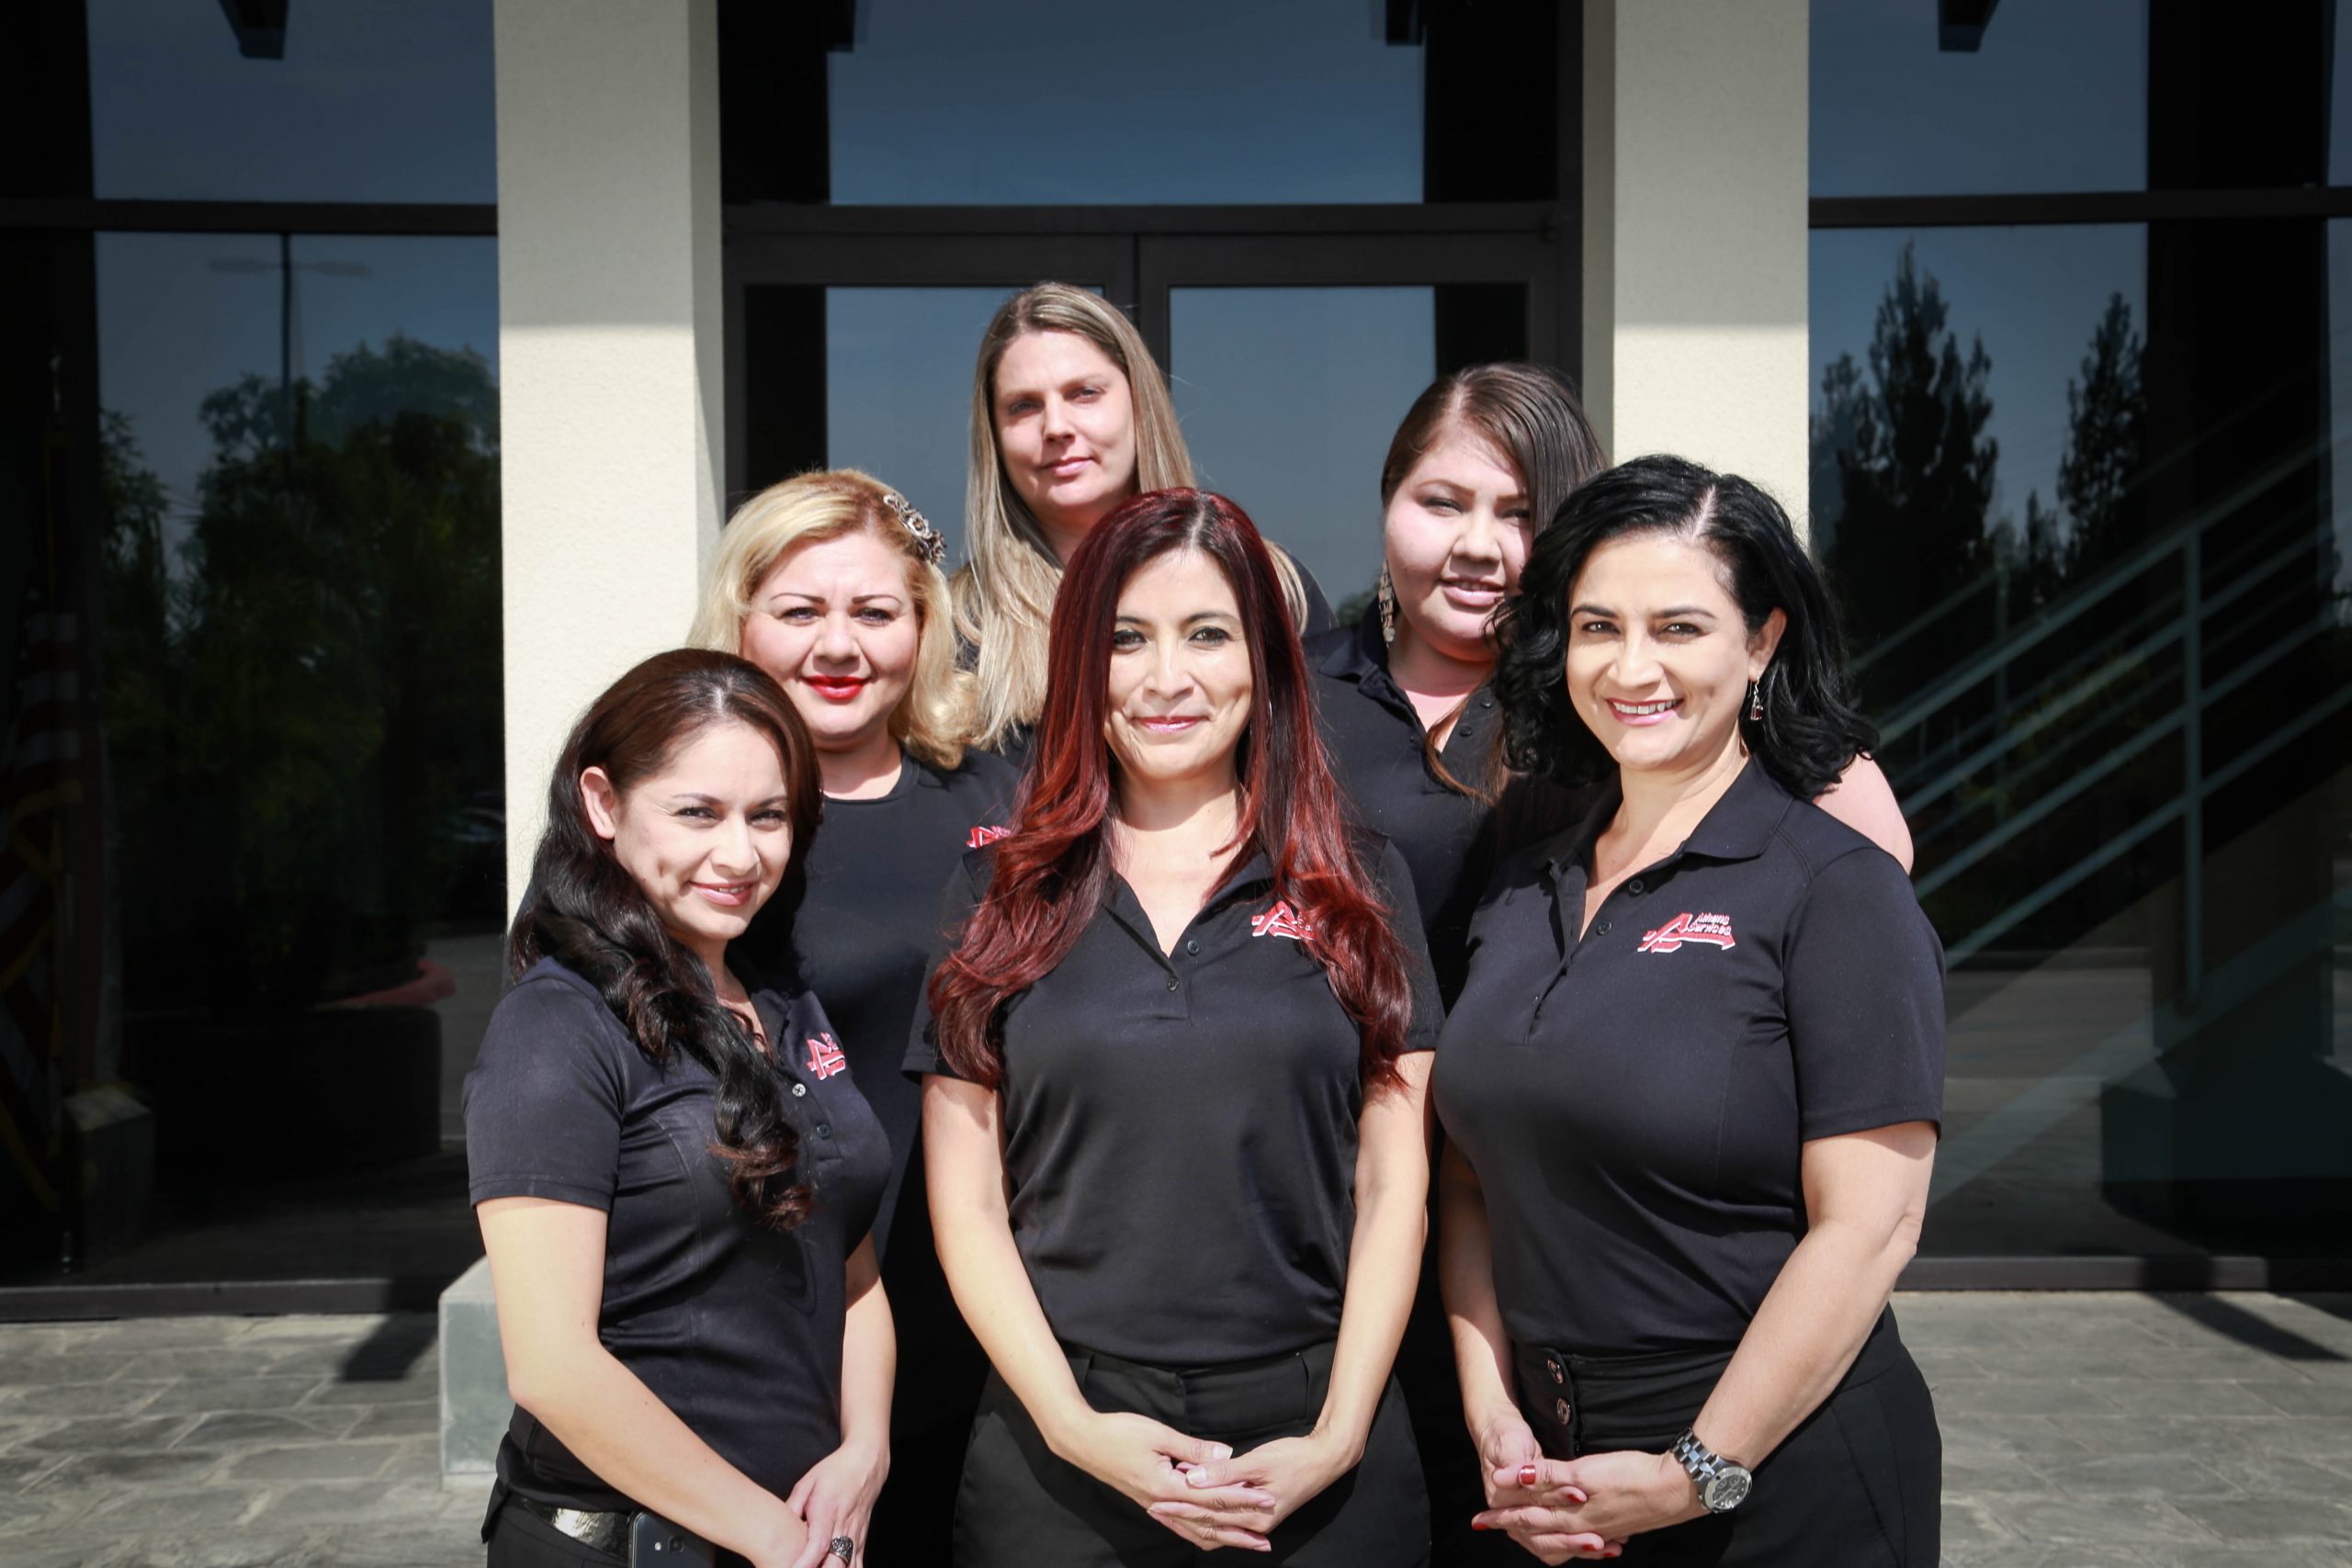 11Athens Services - award-winning customer service team - Residential & Commercial Services